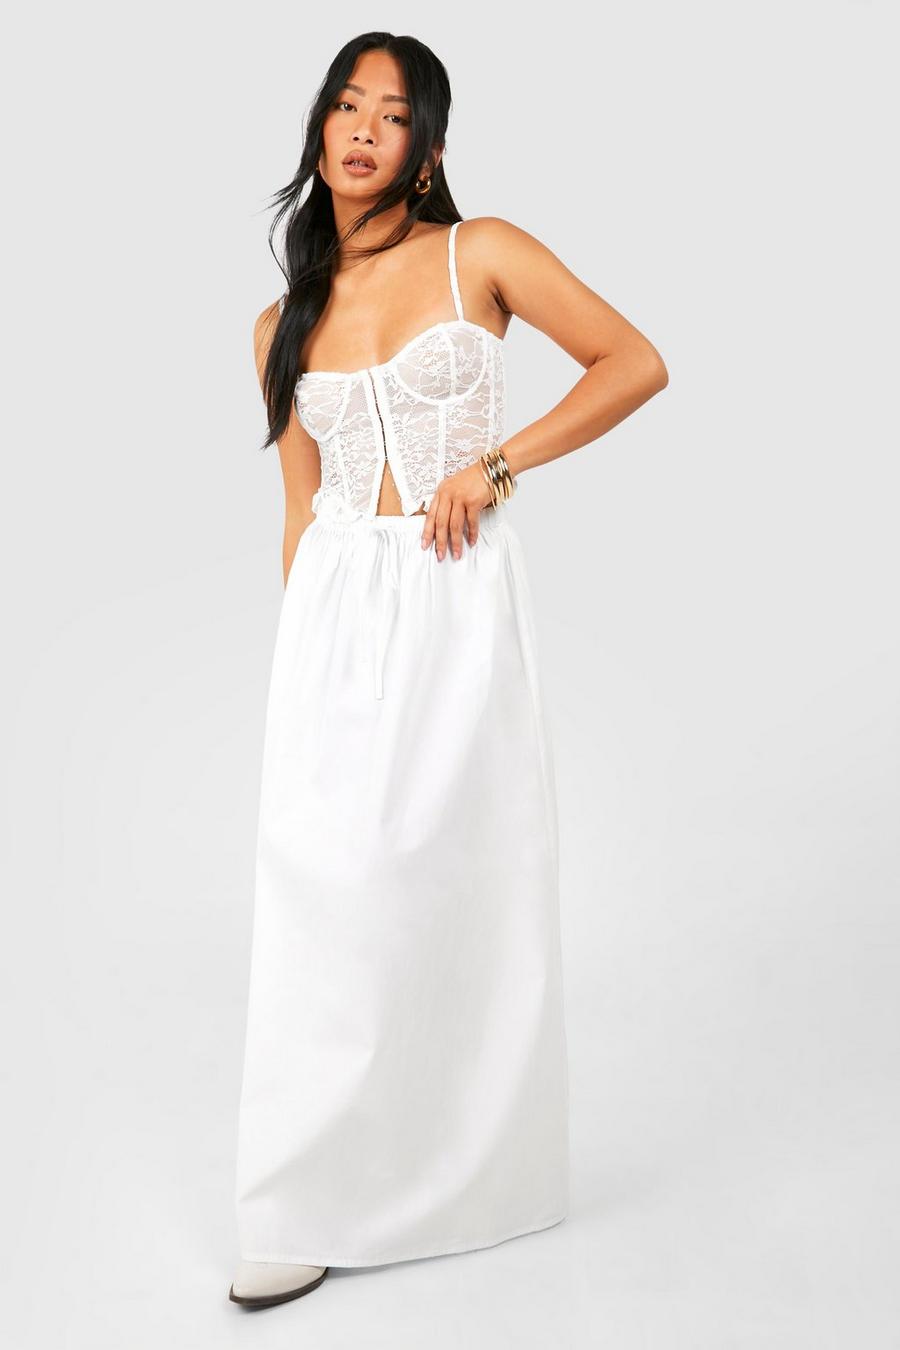 White Going Out Dresses